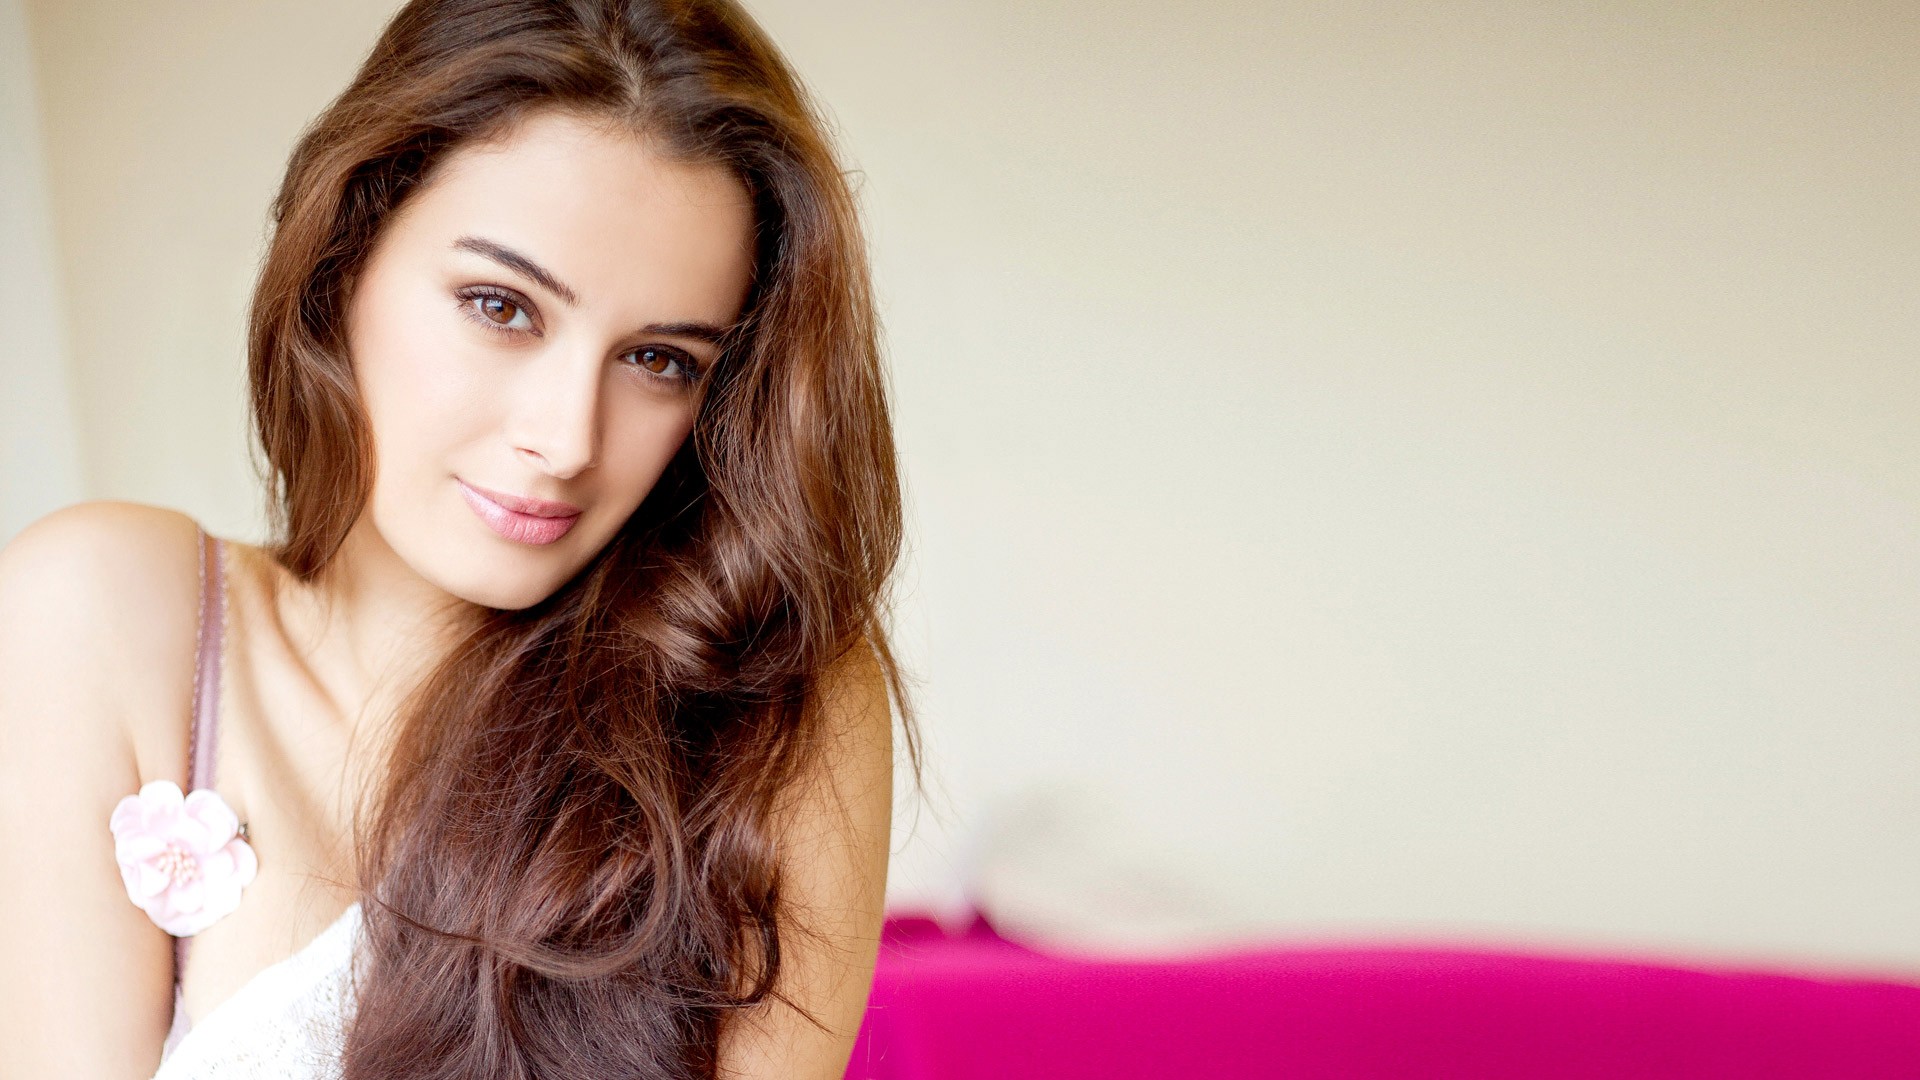 Amazing Evelyn Sharma Beautiful Still Mobile Desktop Free Background Hd Pictures